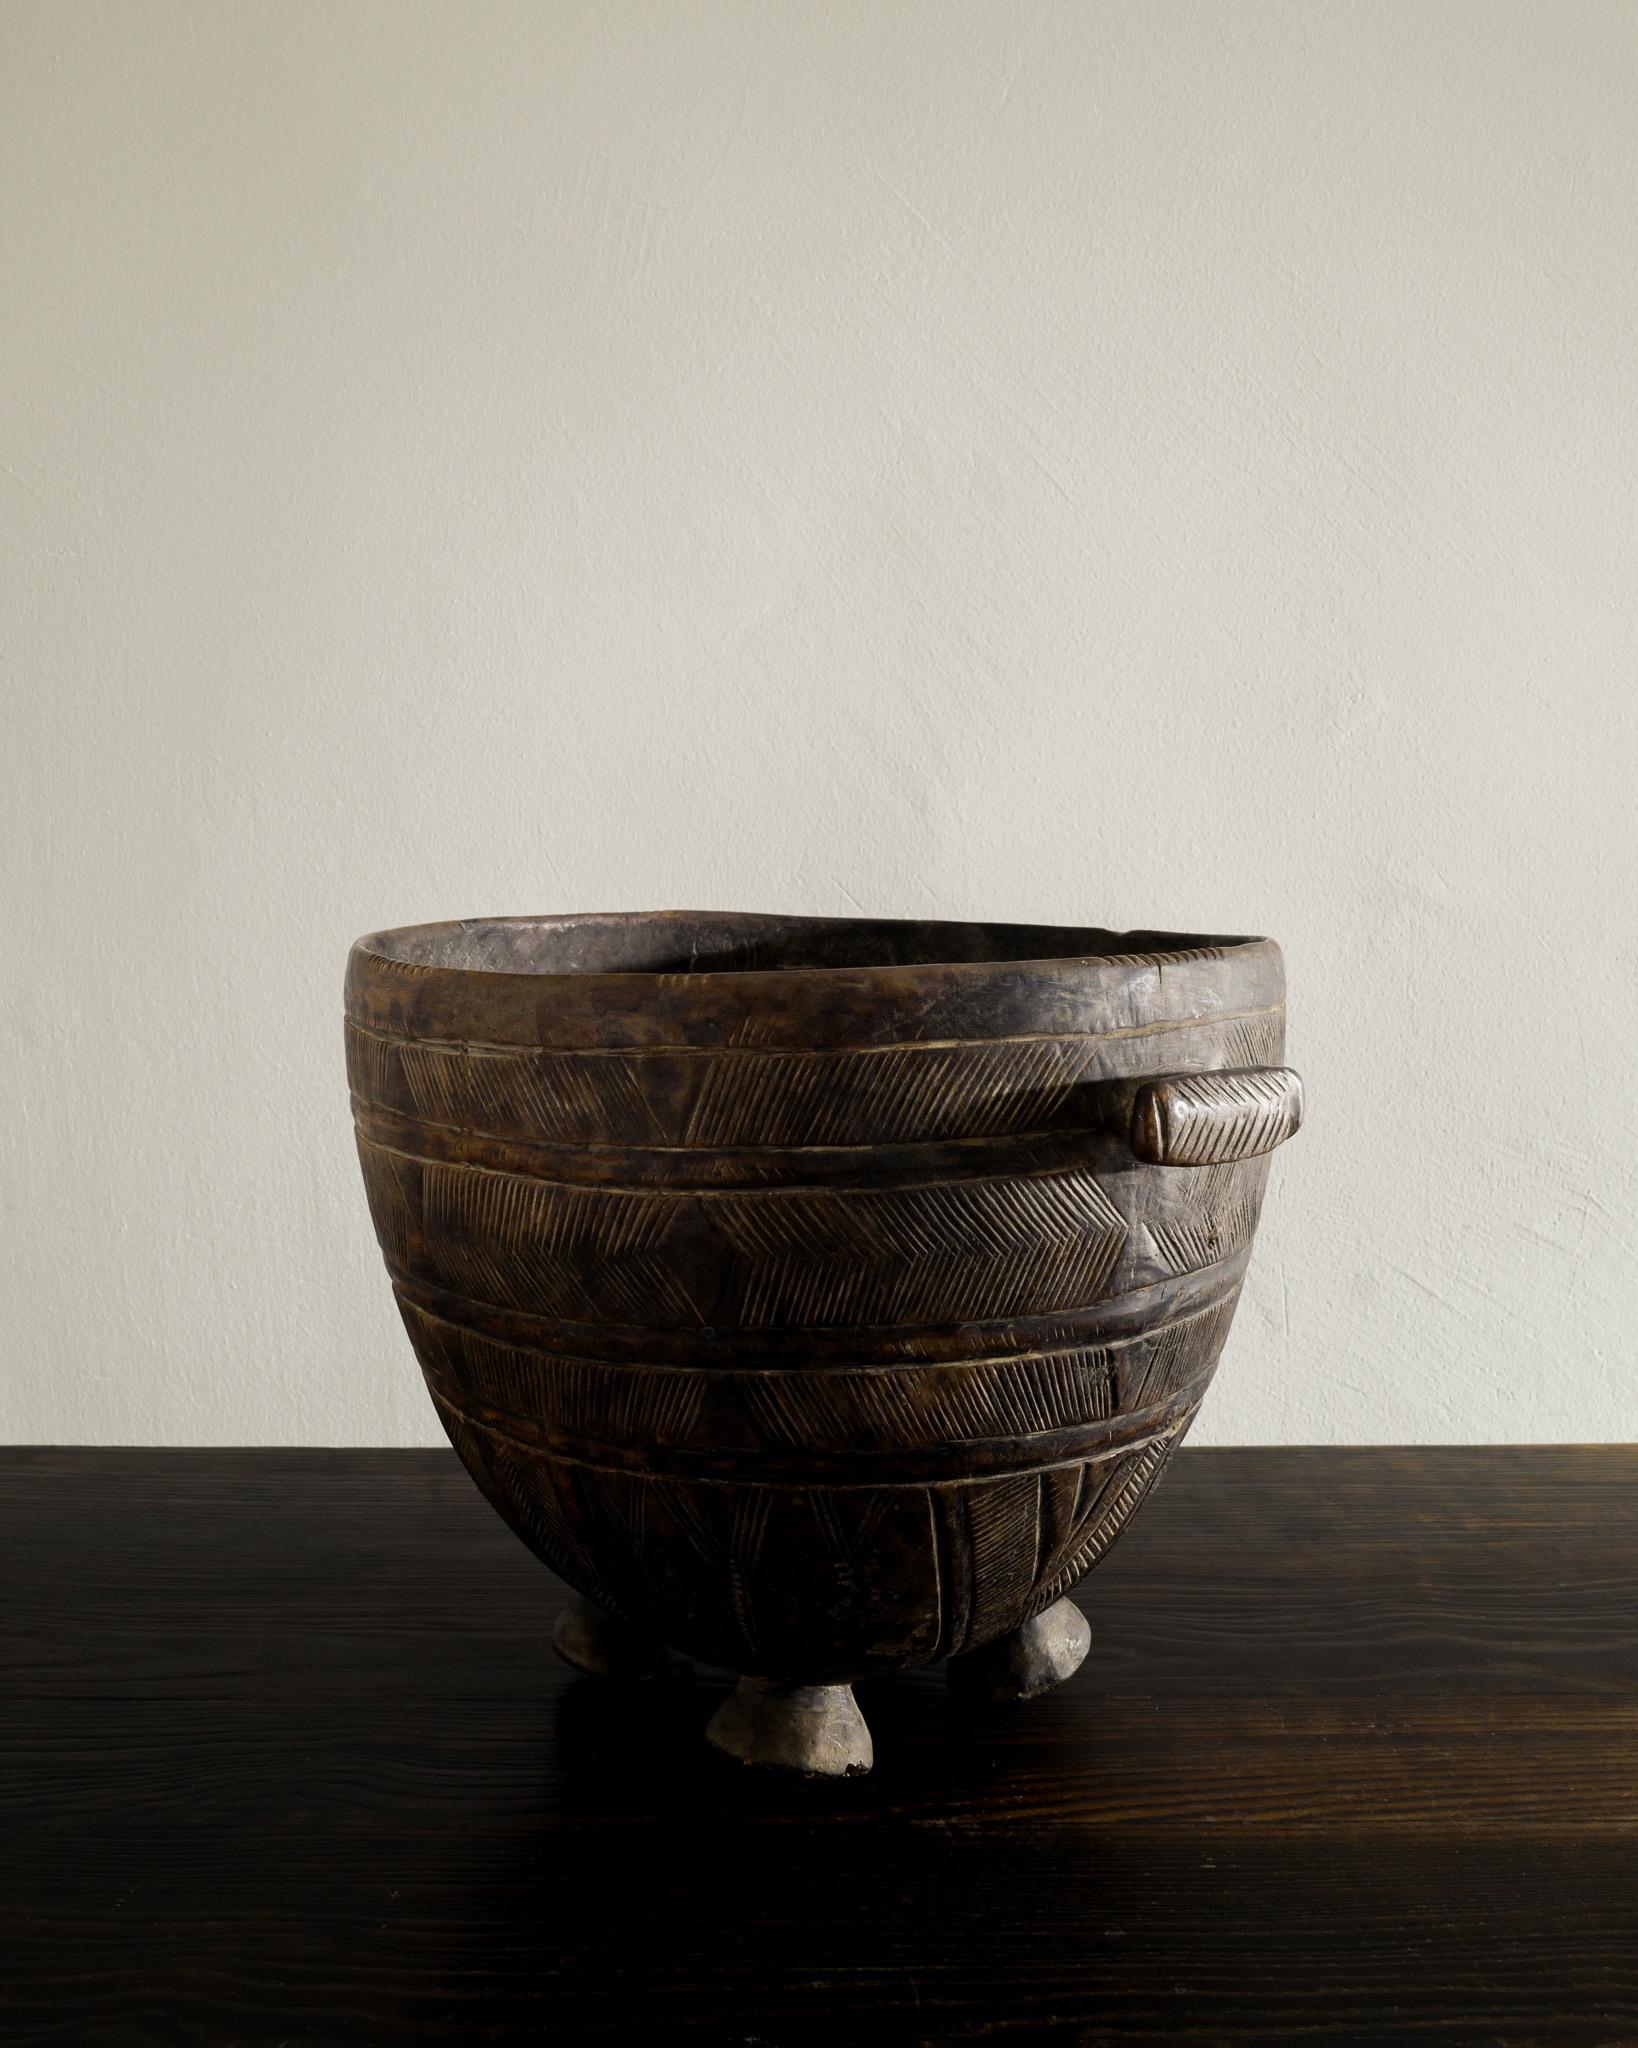 Rare and decorative wooden tribal bucket in solid wood produced in Africa around 1950s. Very nice hand made / carved details. 

Dimensions: H: 11 in (28 cm) Diameter: 13.40 in (34 cm)
